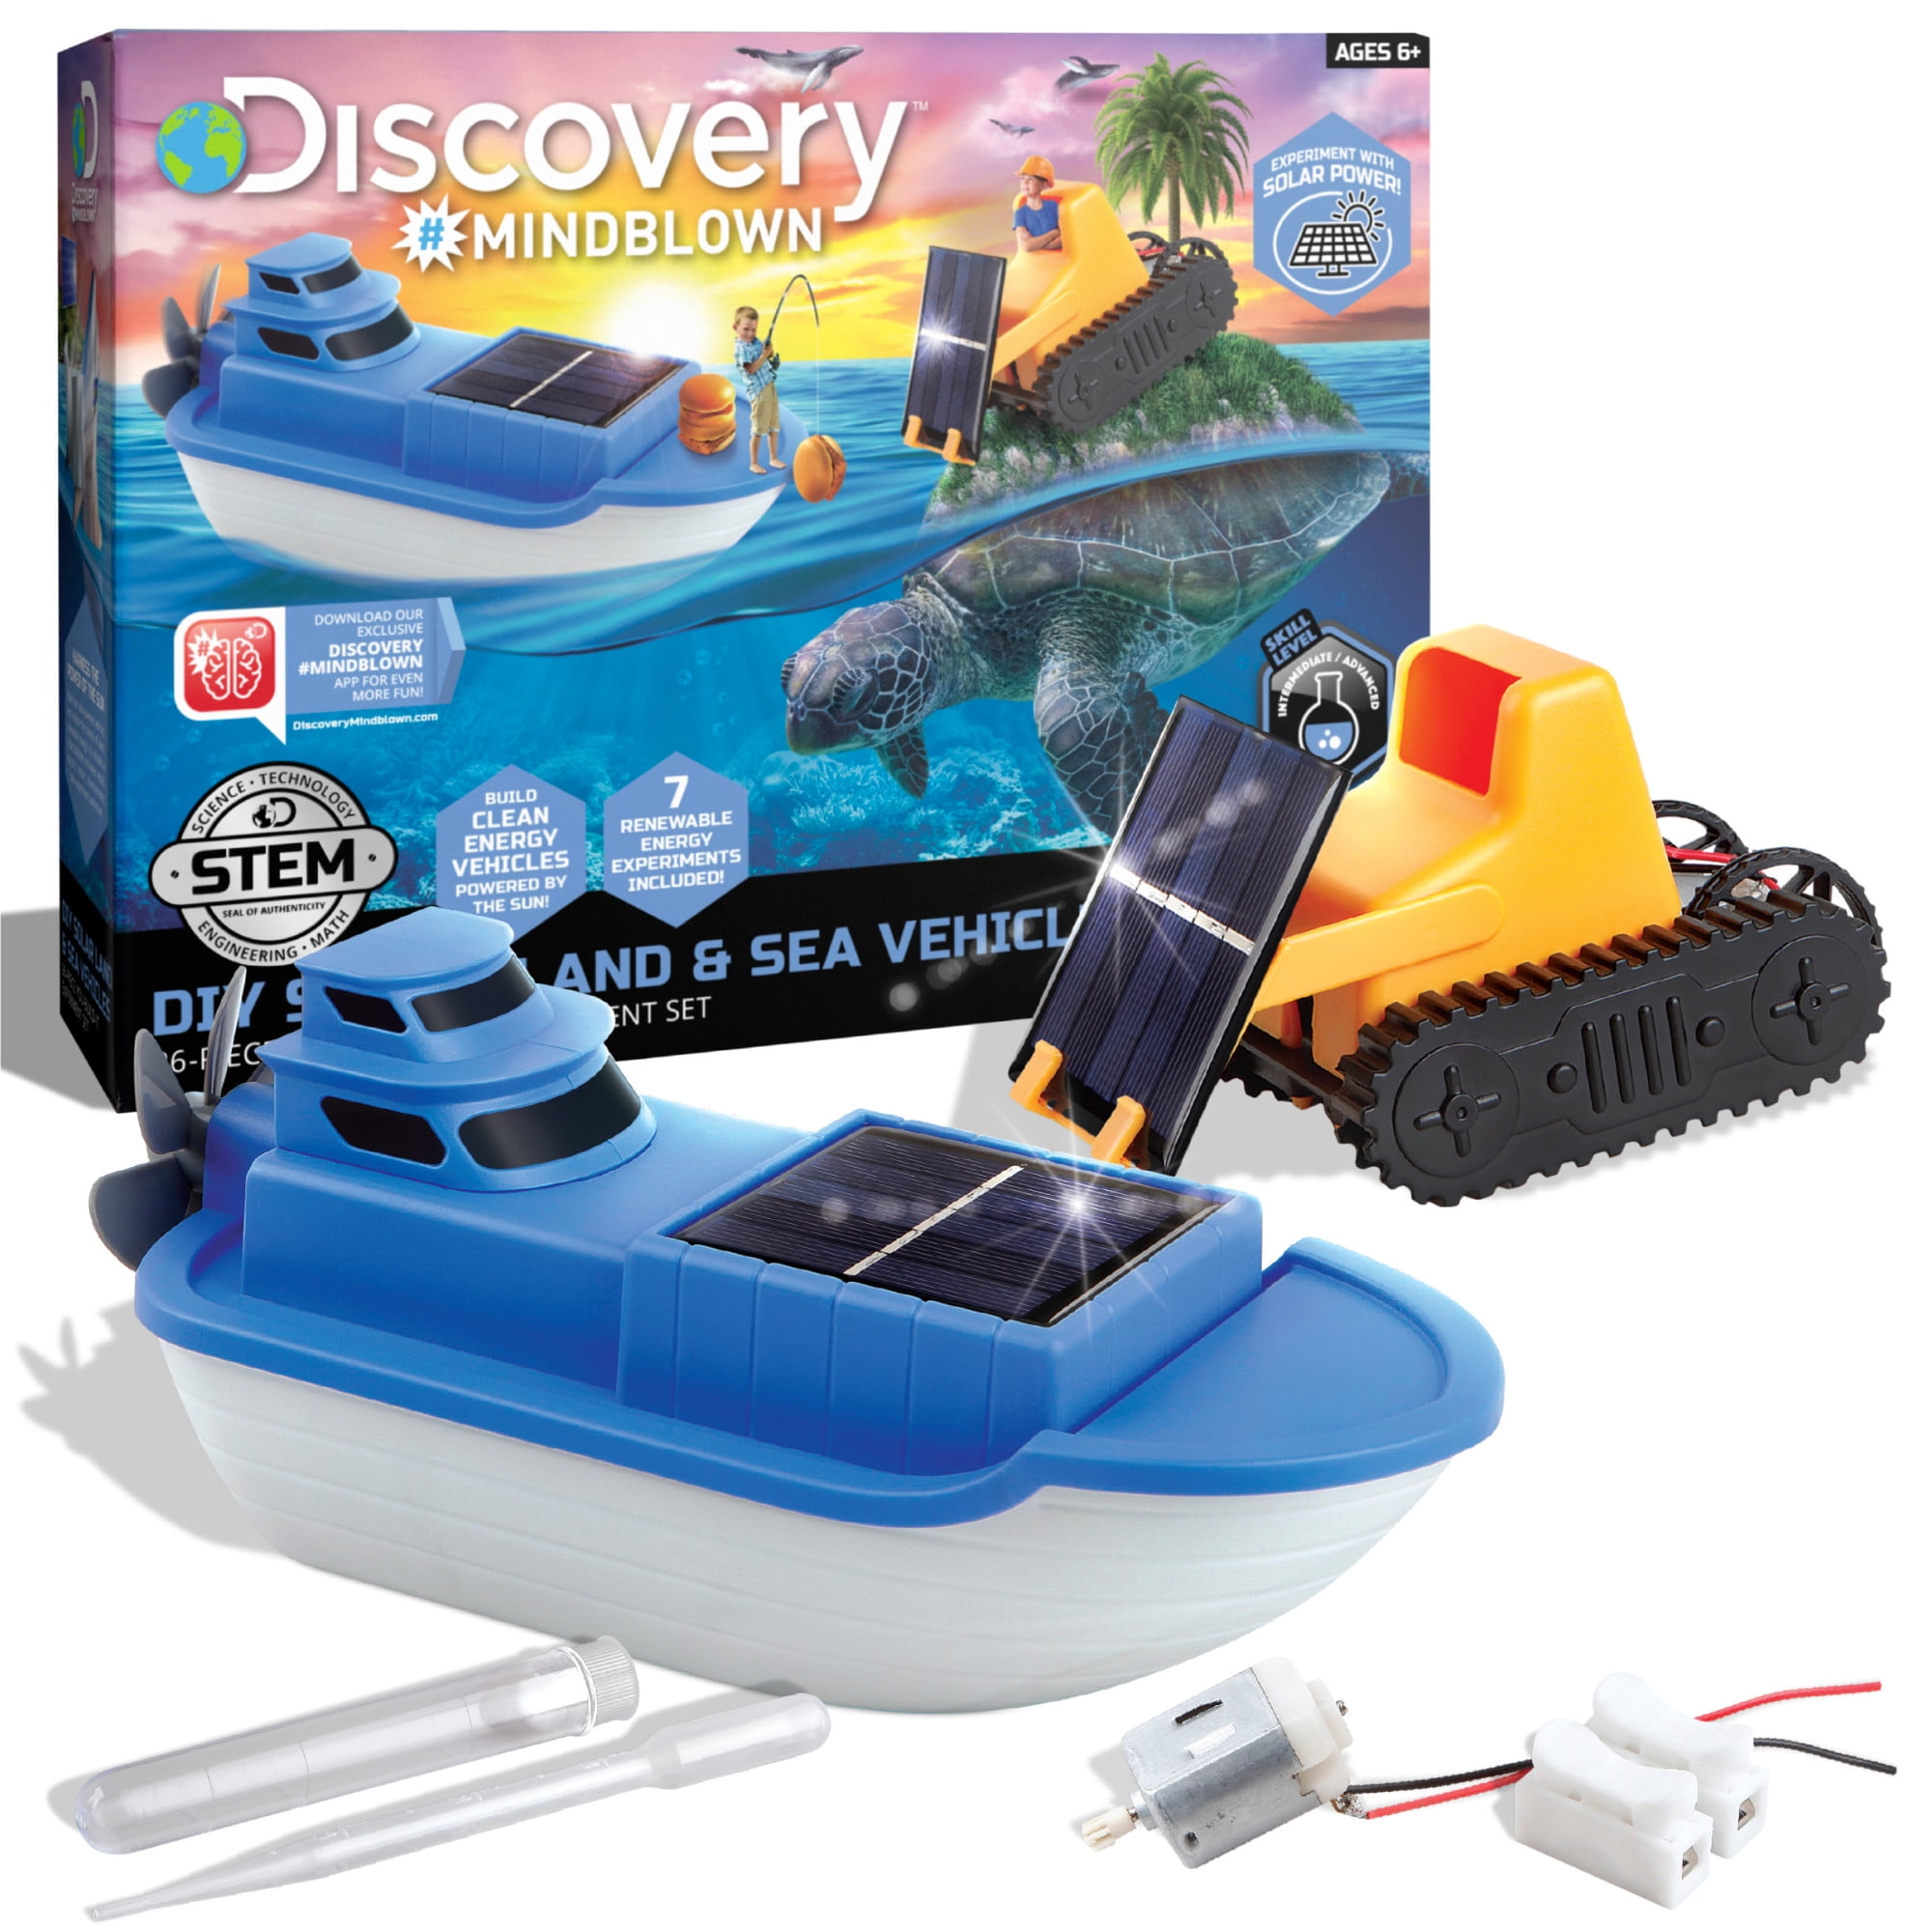 NEW 6 IN 1 SOLAR POWERED KIT SCIENCE FUN KIDS CHILDREN GAMES CAR BOAT DRONE HOME 